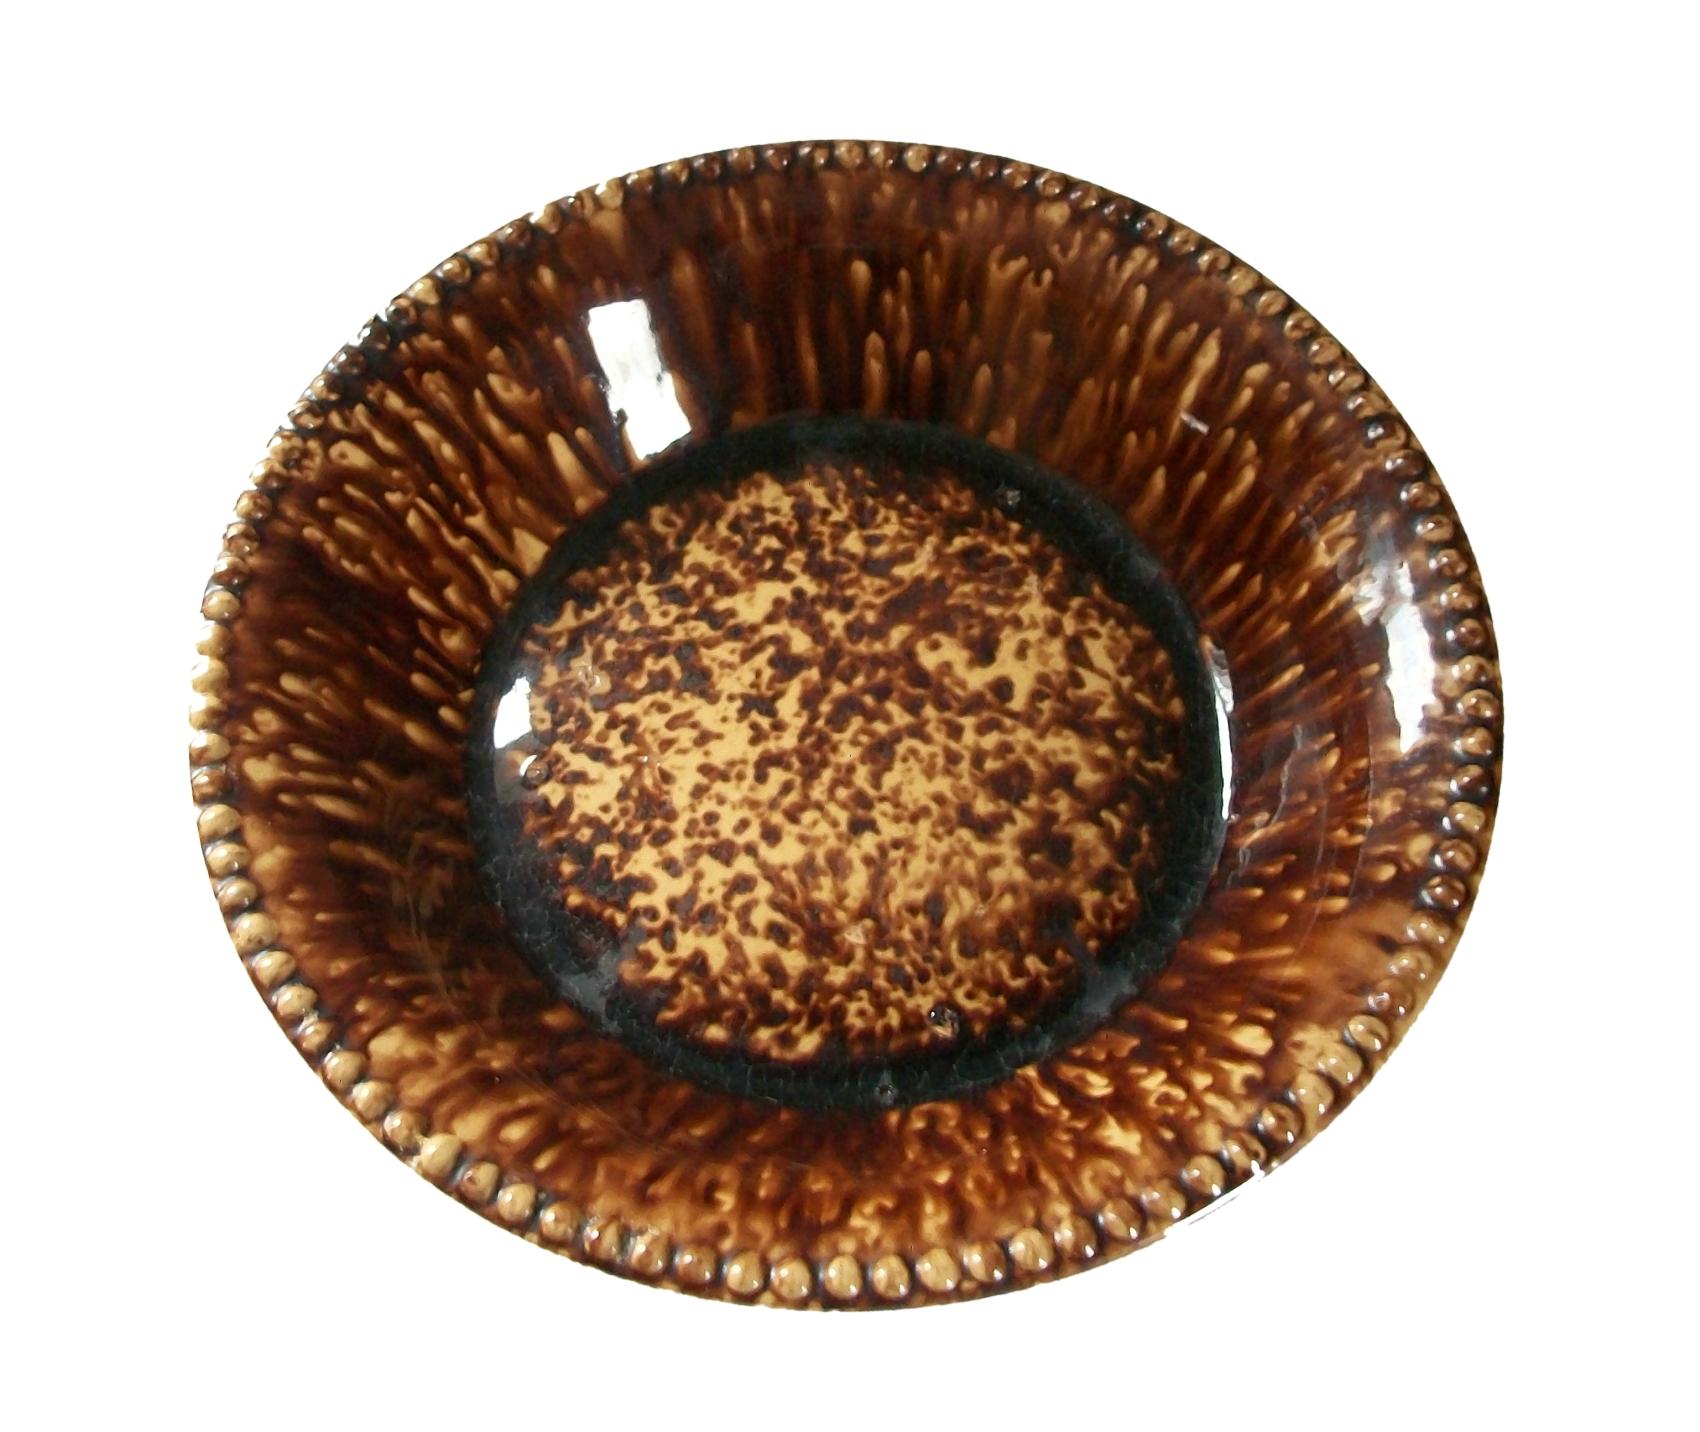 American Craftsman BENNINGTON - Large Brown Spatterware Bowl with Molded Edge - U.S. - 19th Century For Sale